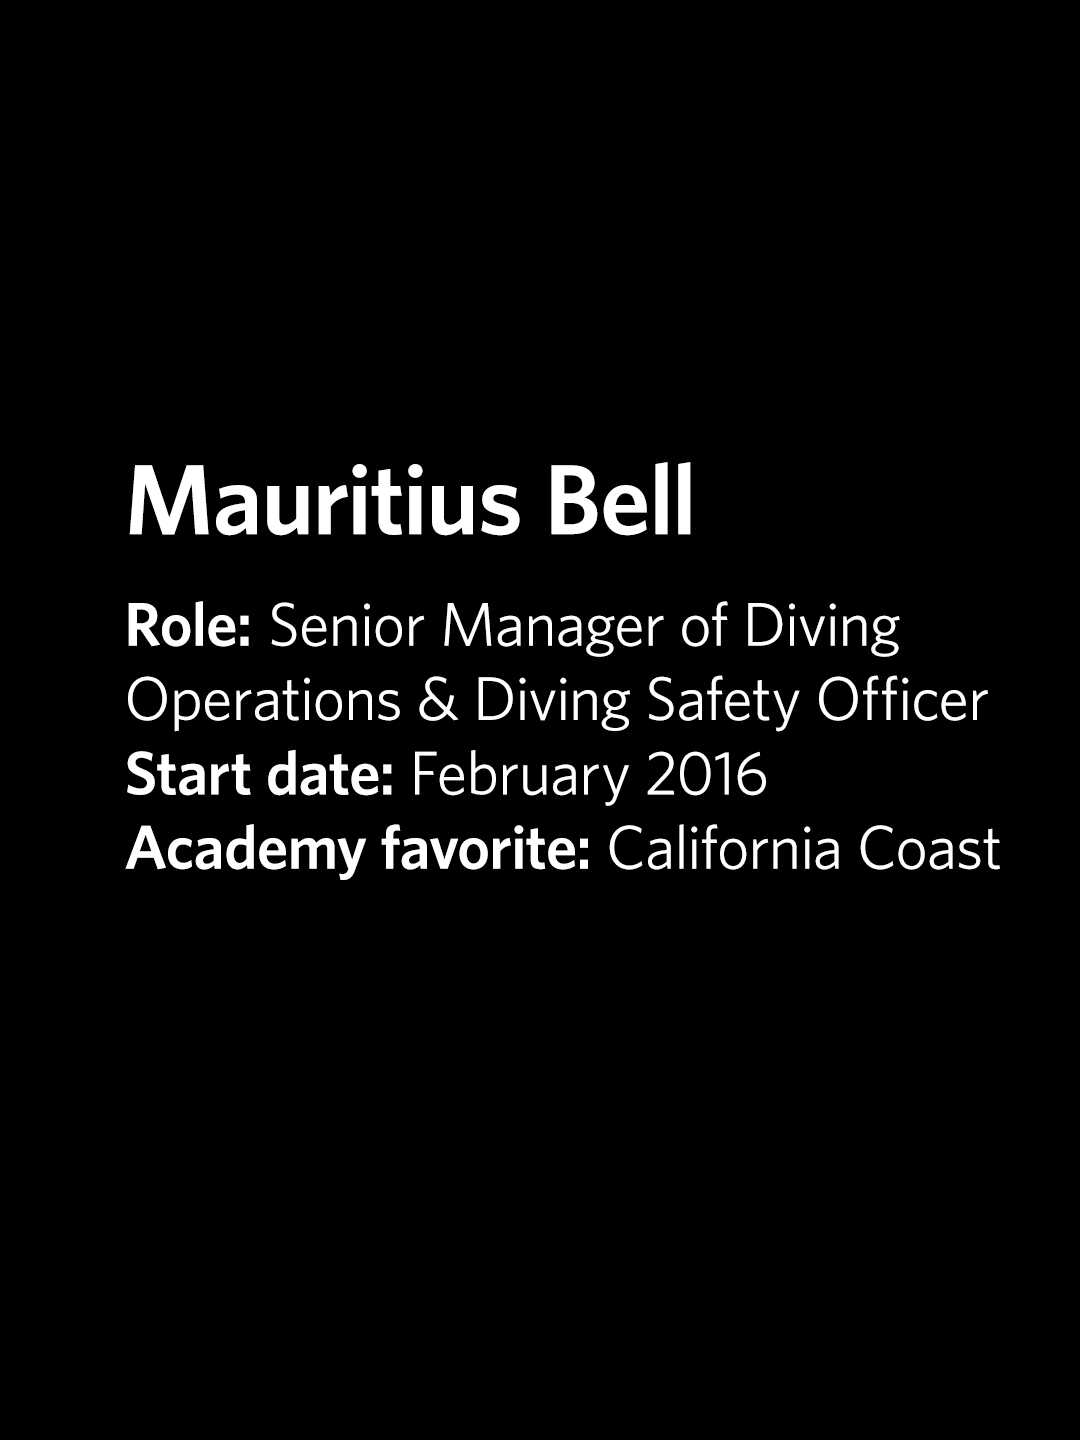 Mauritius Bell, Sr. Mgr. of Diving Operations & Diving Safety Officer at Academy, started Feb. 2016, favorite exhibit Cal Coast